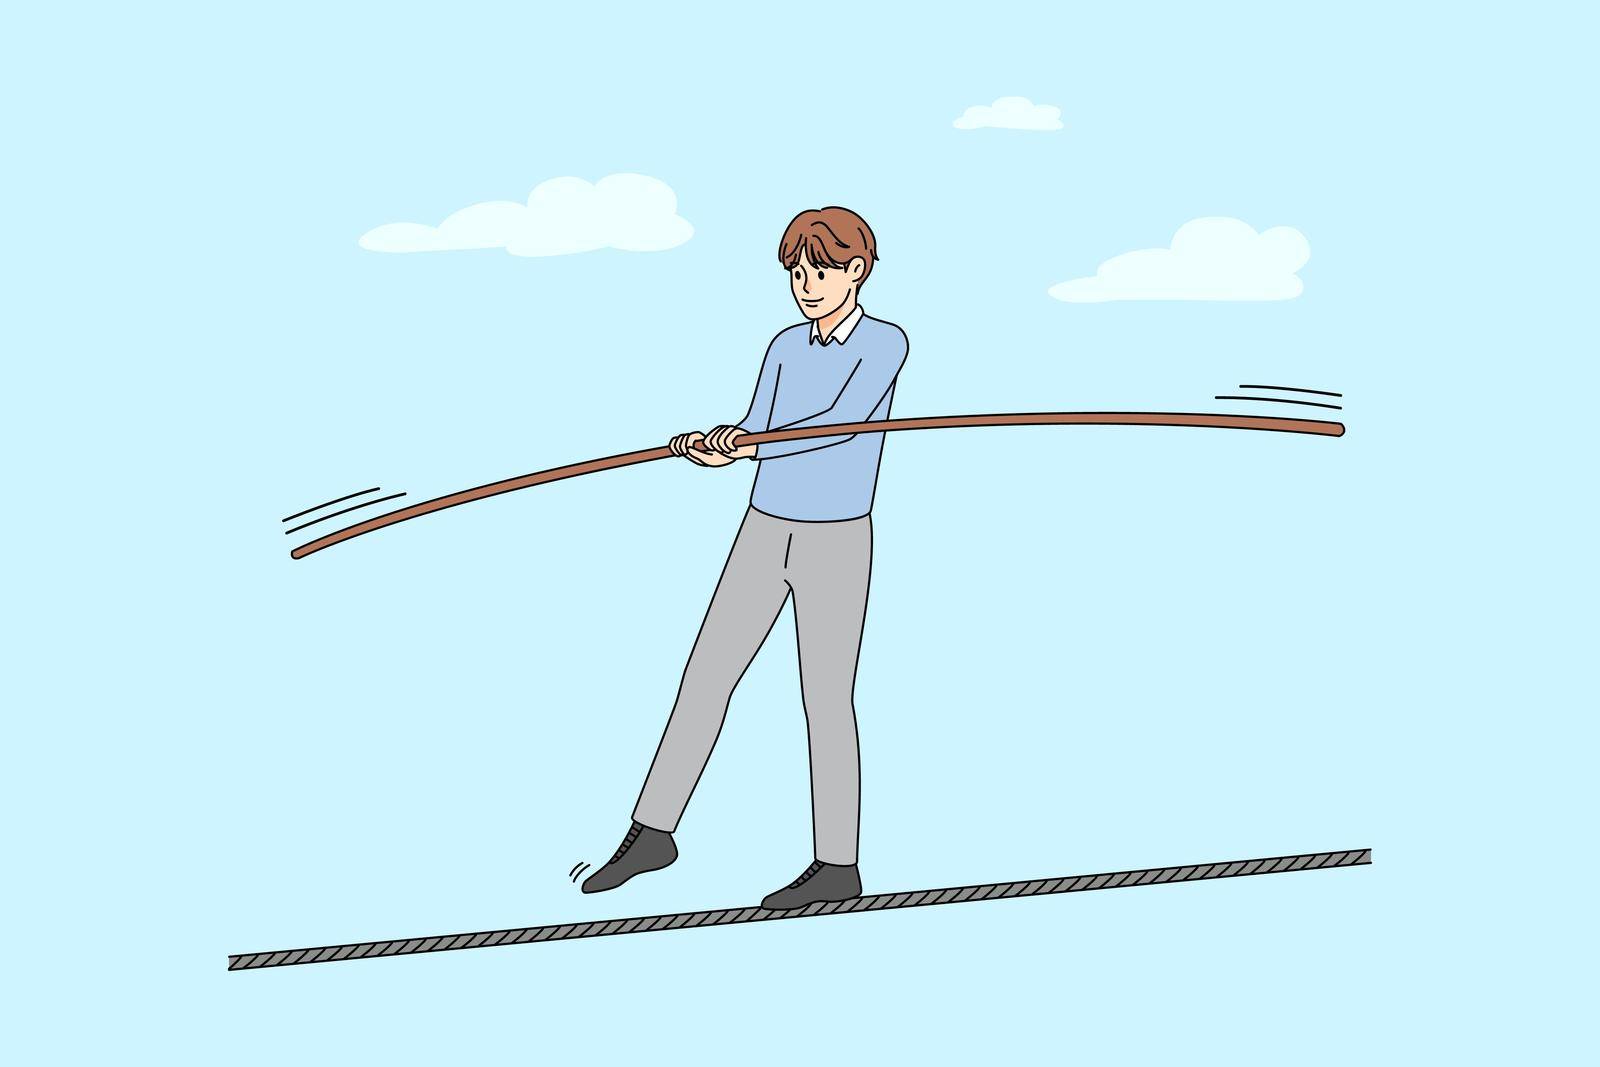 Man walk on thin rope balancing. Risky businessman engaged in business deal or offer. Job challenge and risk concept. Vector illustration.